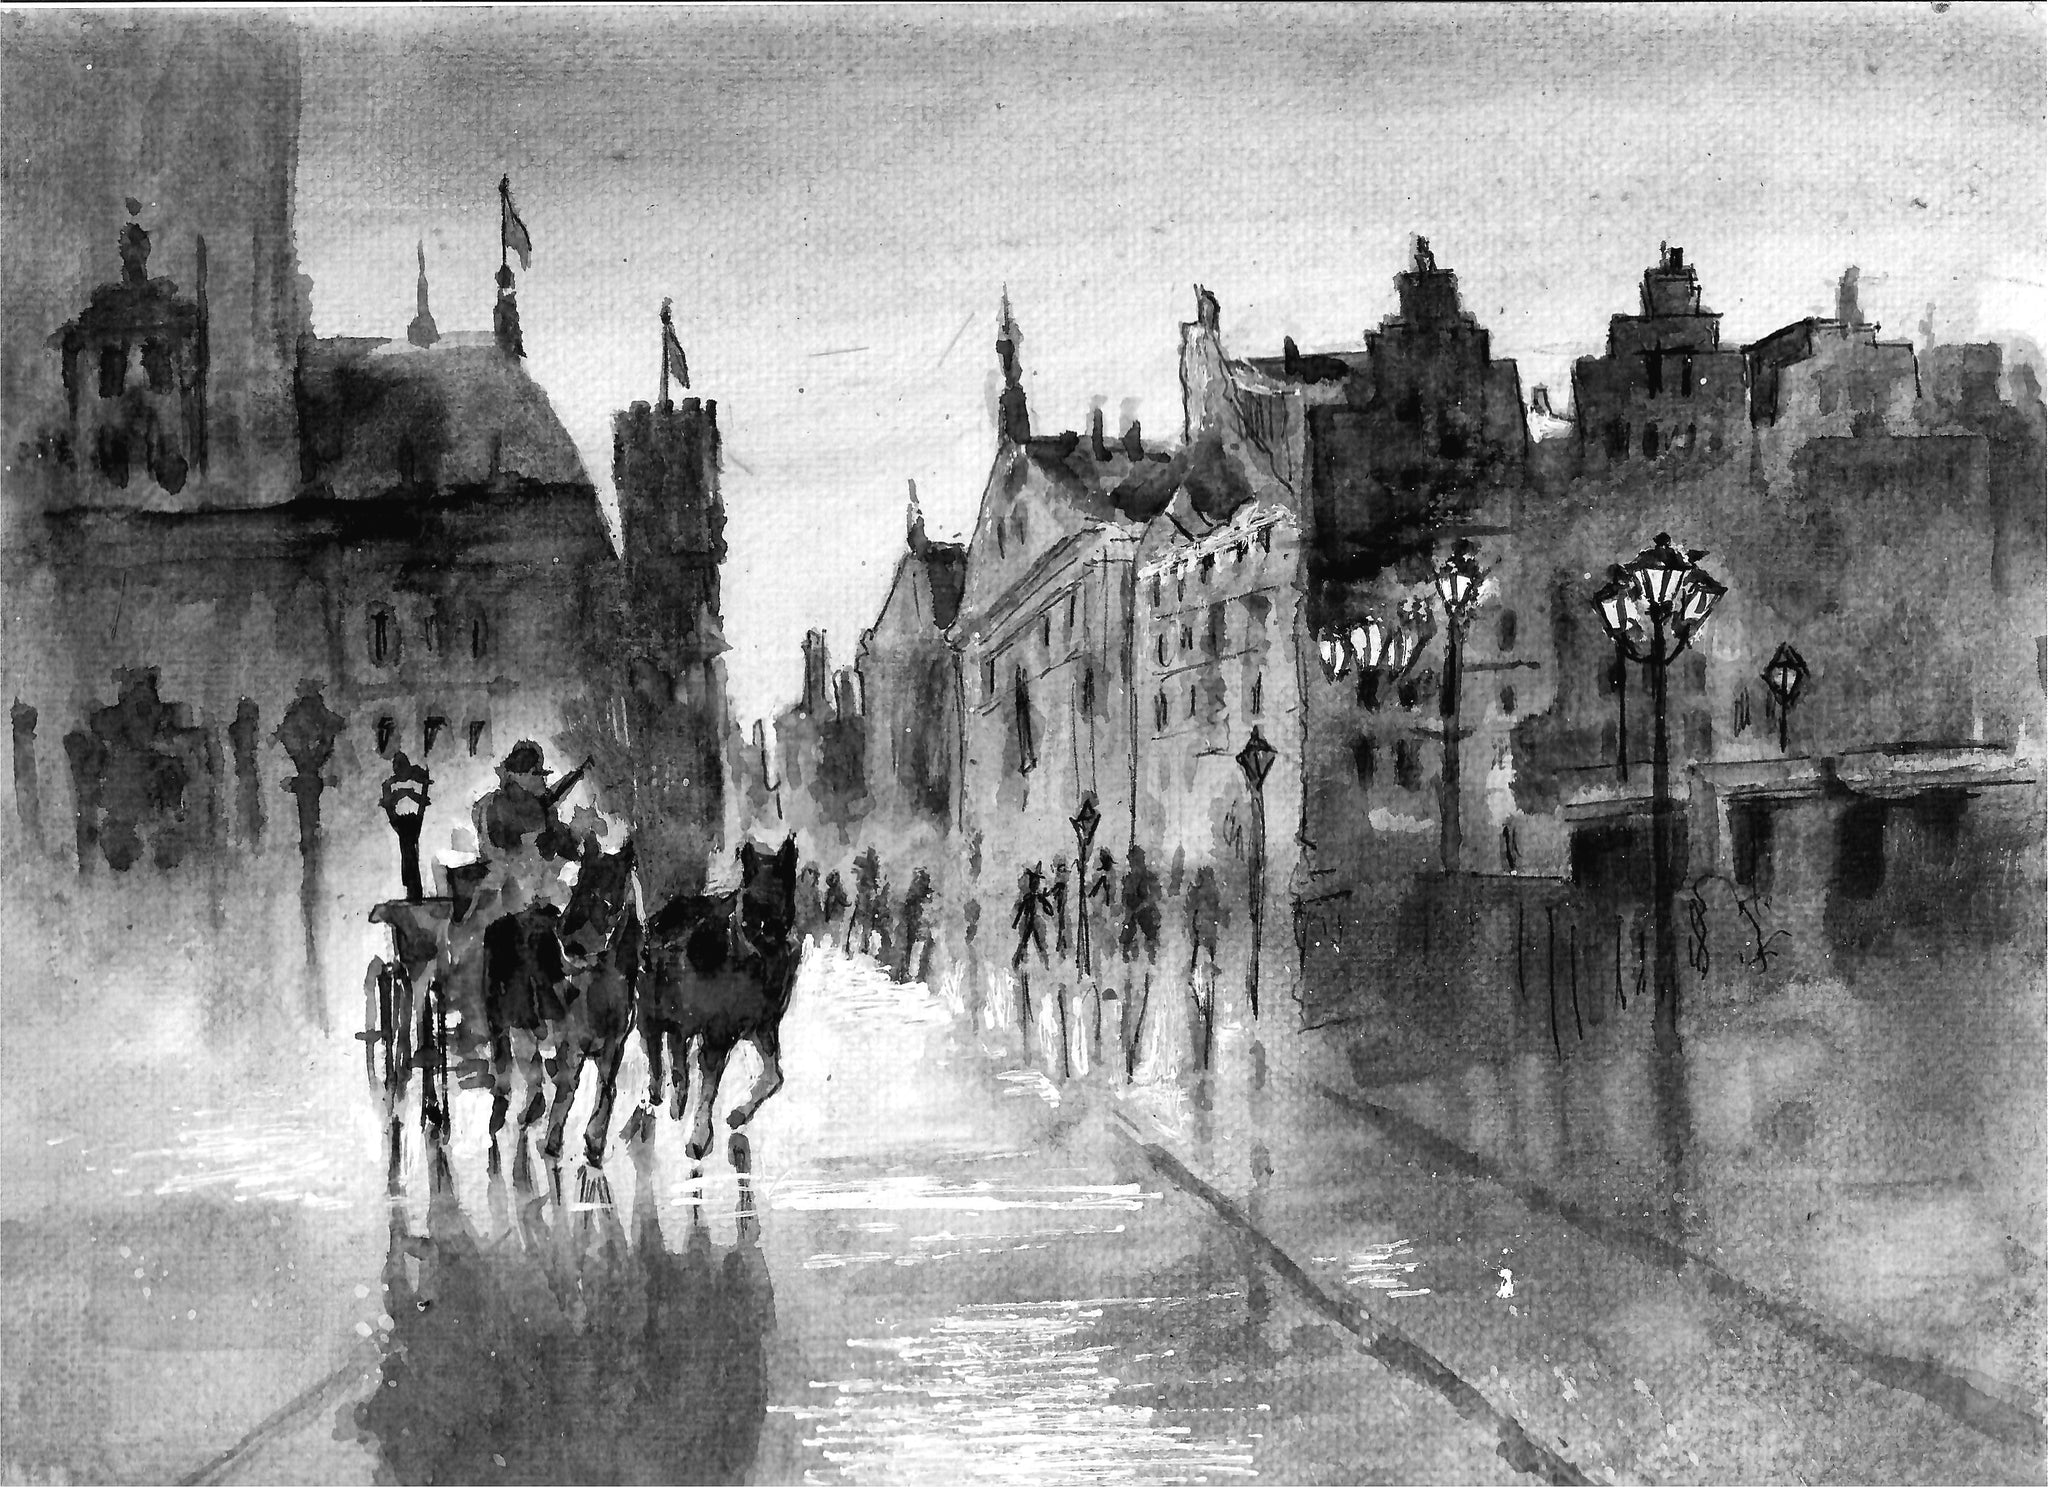 Cities - Old London Street, Old London Rain, Horse And Buggy, Black And White